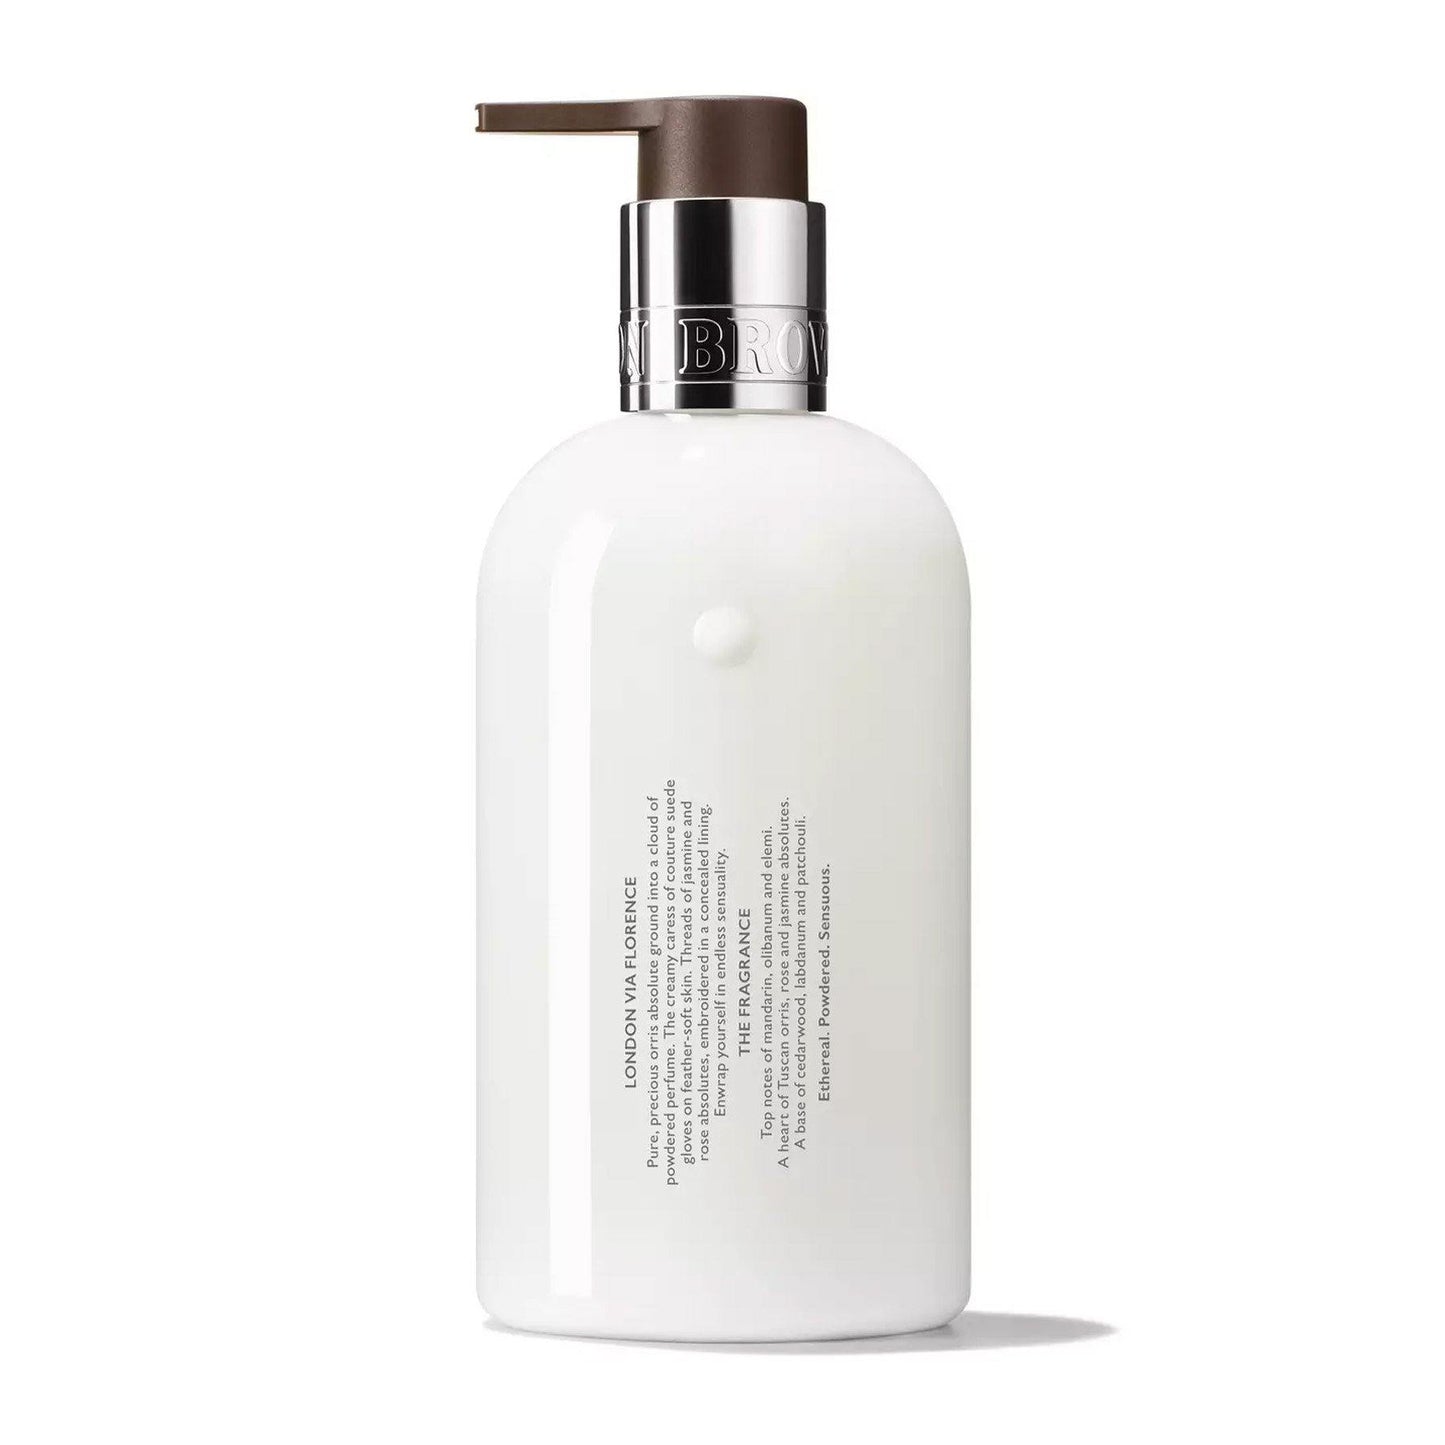 Suede Orris Body Lotion - Cosmos Boutique New Jersey